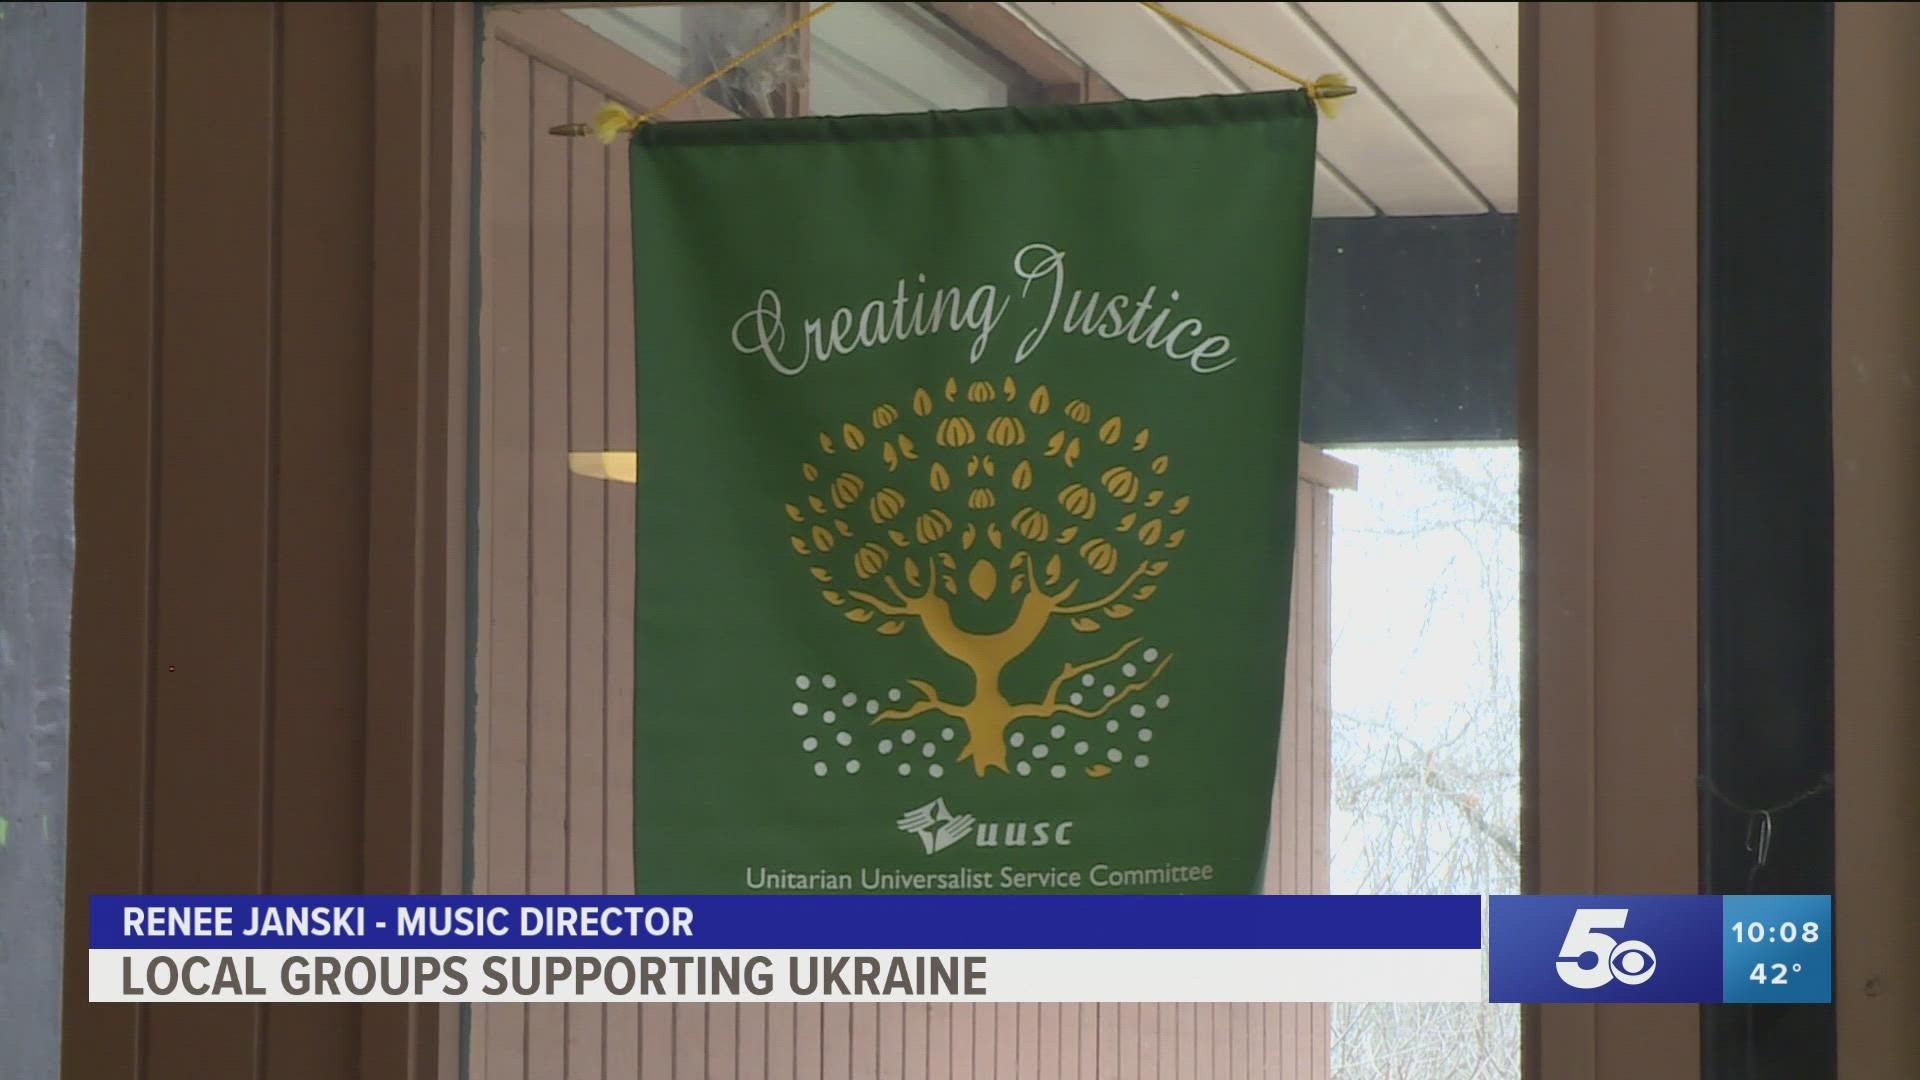 A local church shows support to Ukraine by learning the Ukrainian National Anthem.